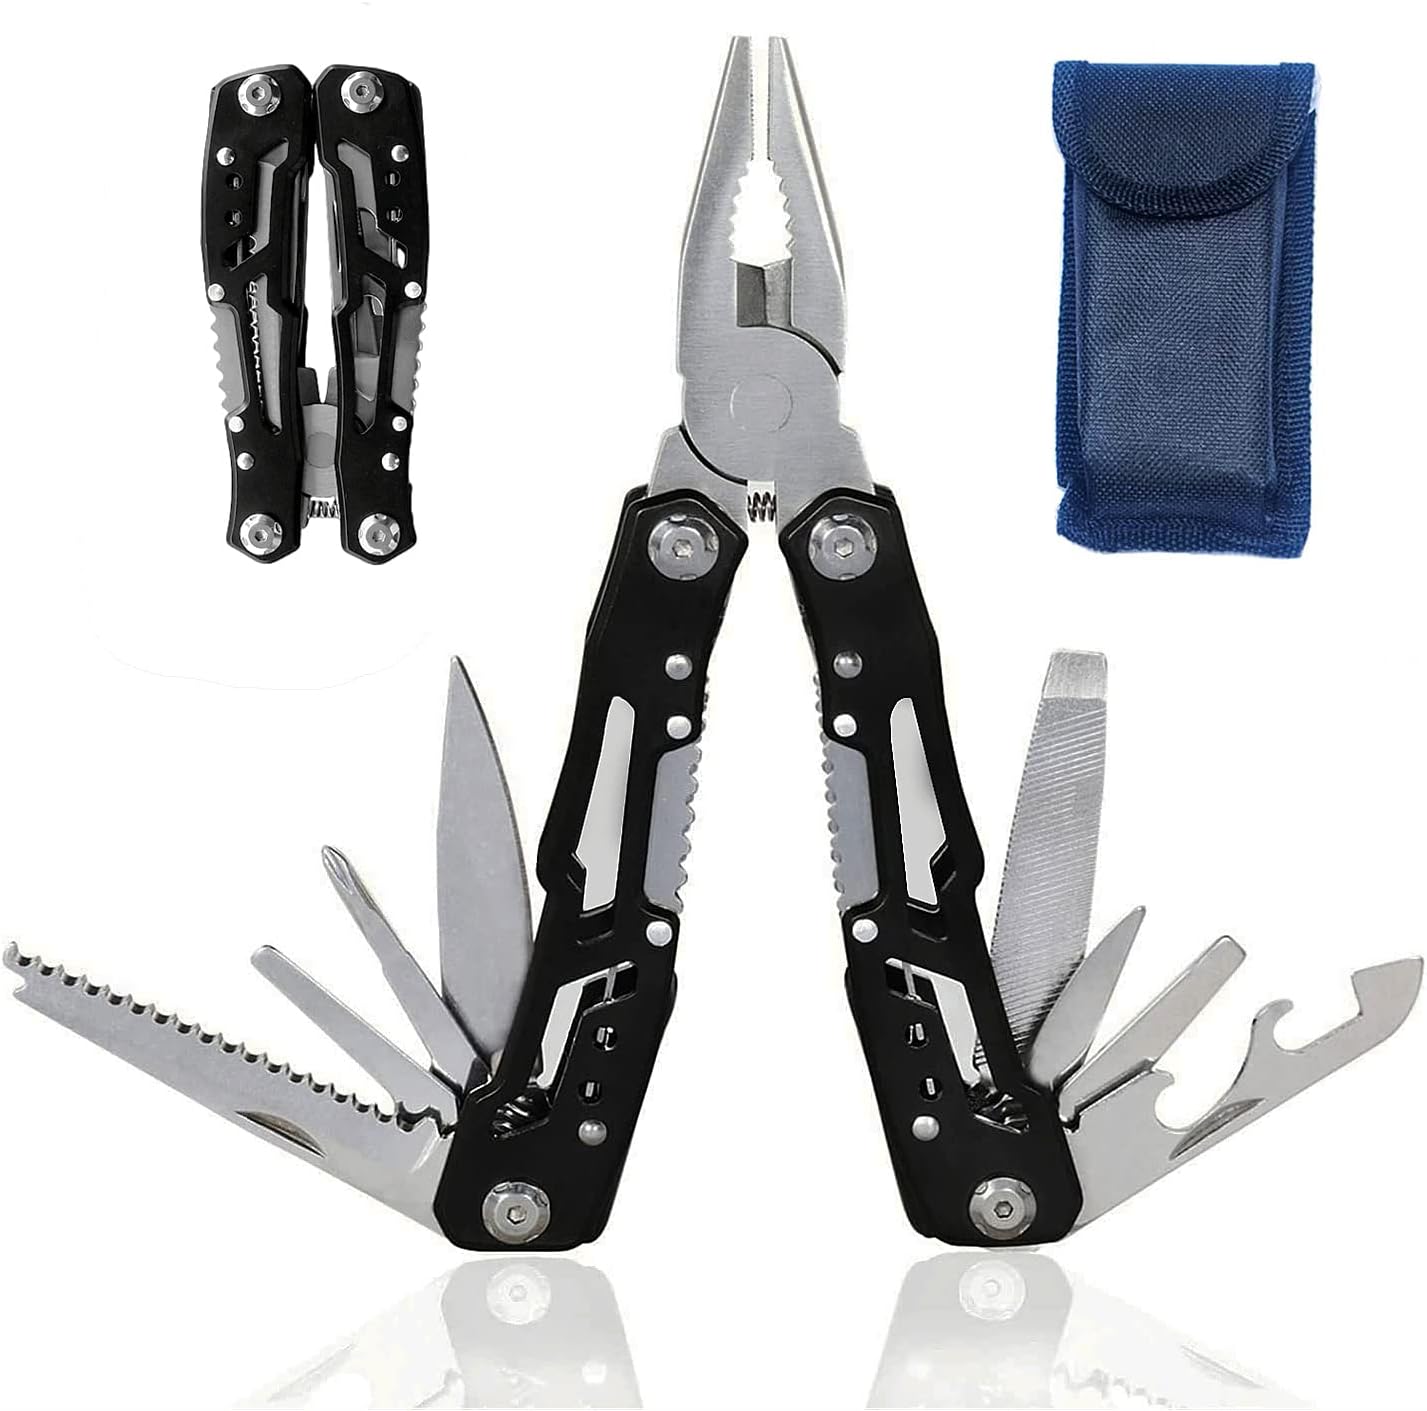 Multitool with Pocket Knife Safety Lock,…